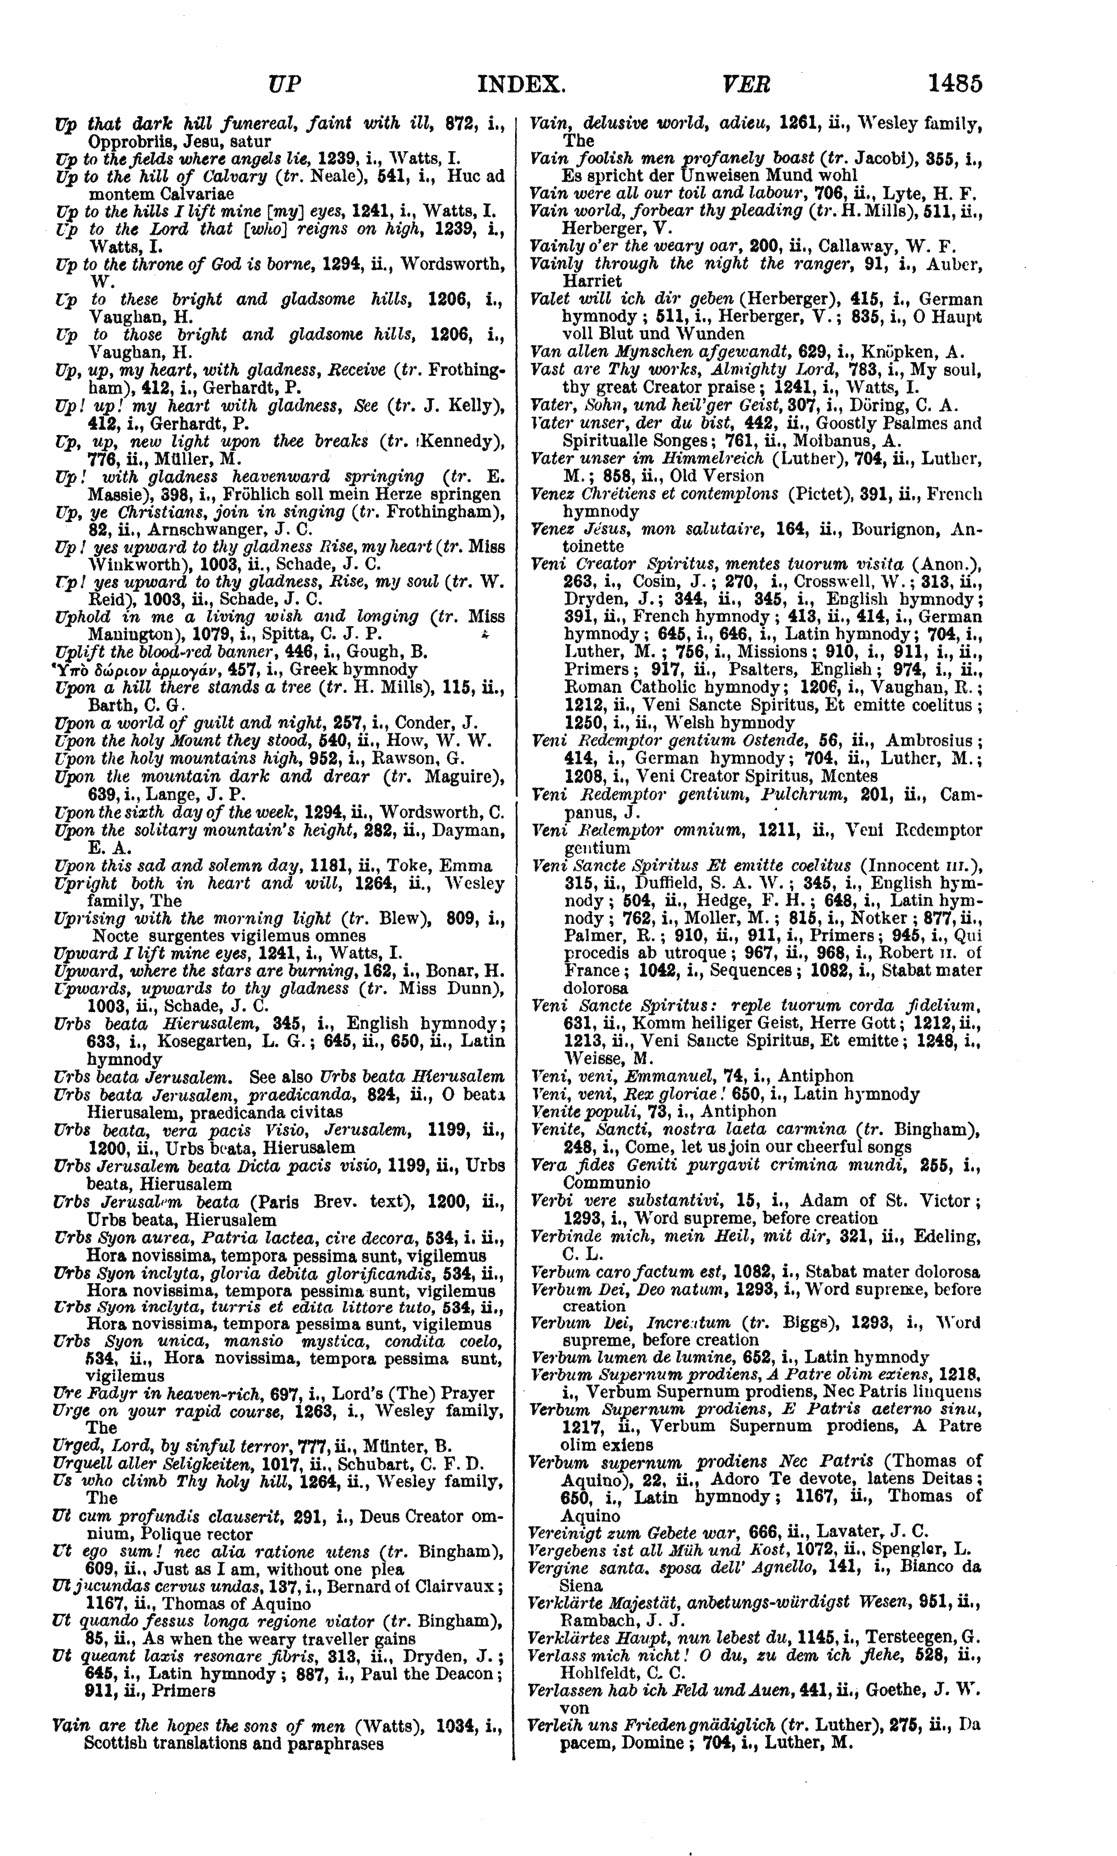 Image of page 1485